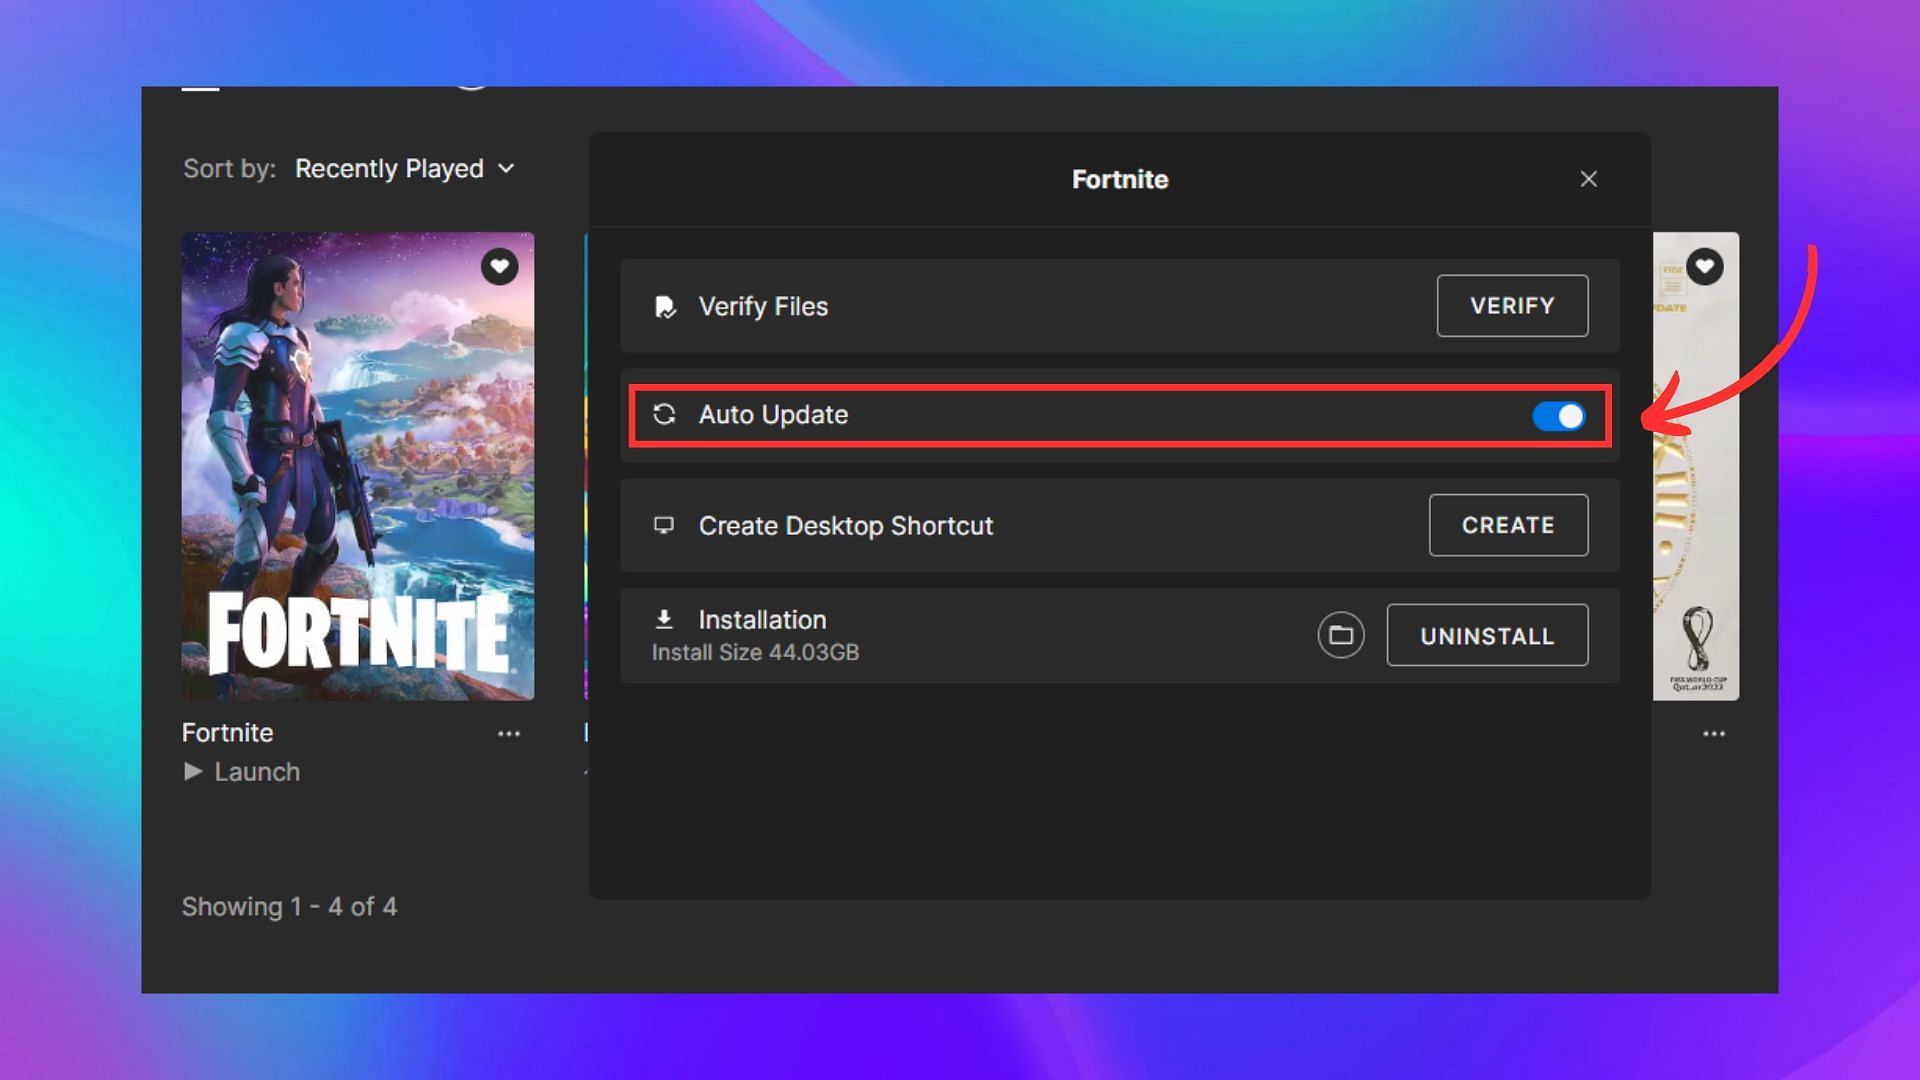 How To Make Games Download Faster On PC